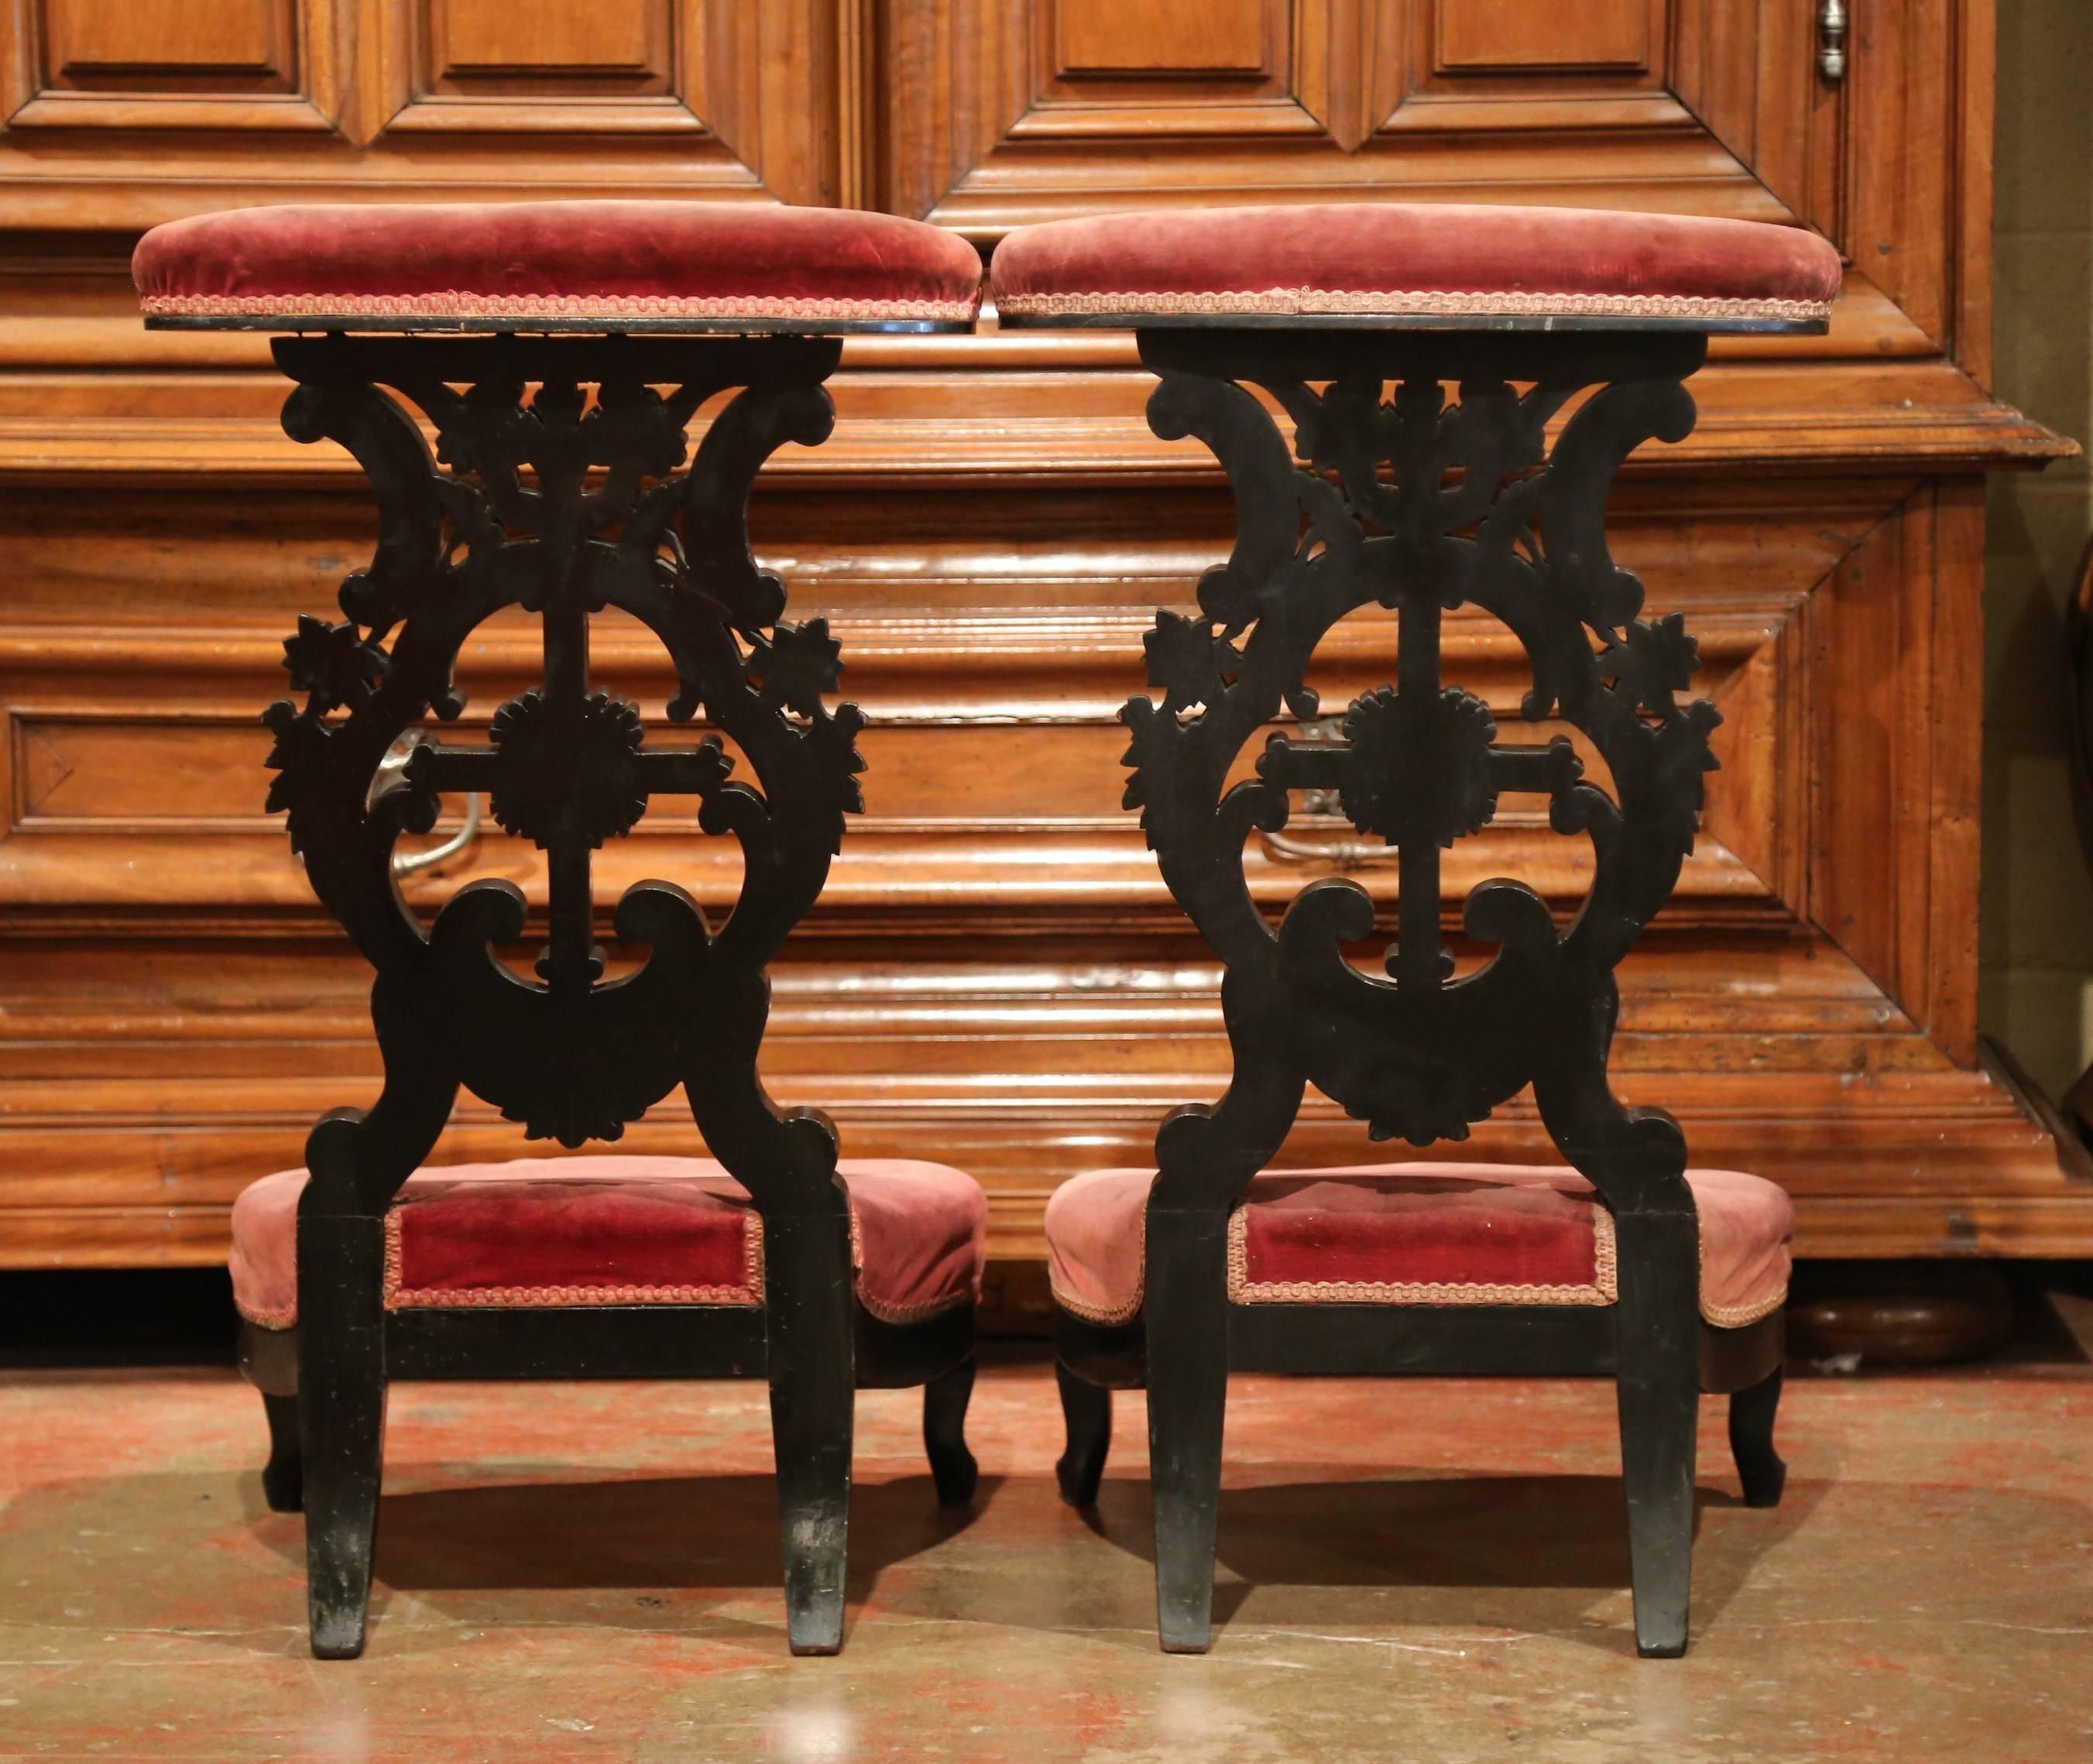 Pair of French Louis XV Hand Carved Walnut Prayer Chairs with Blackened Finish 1